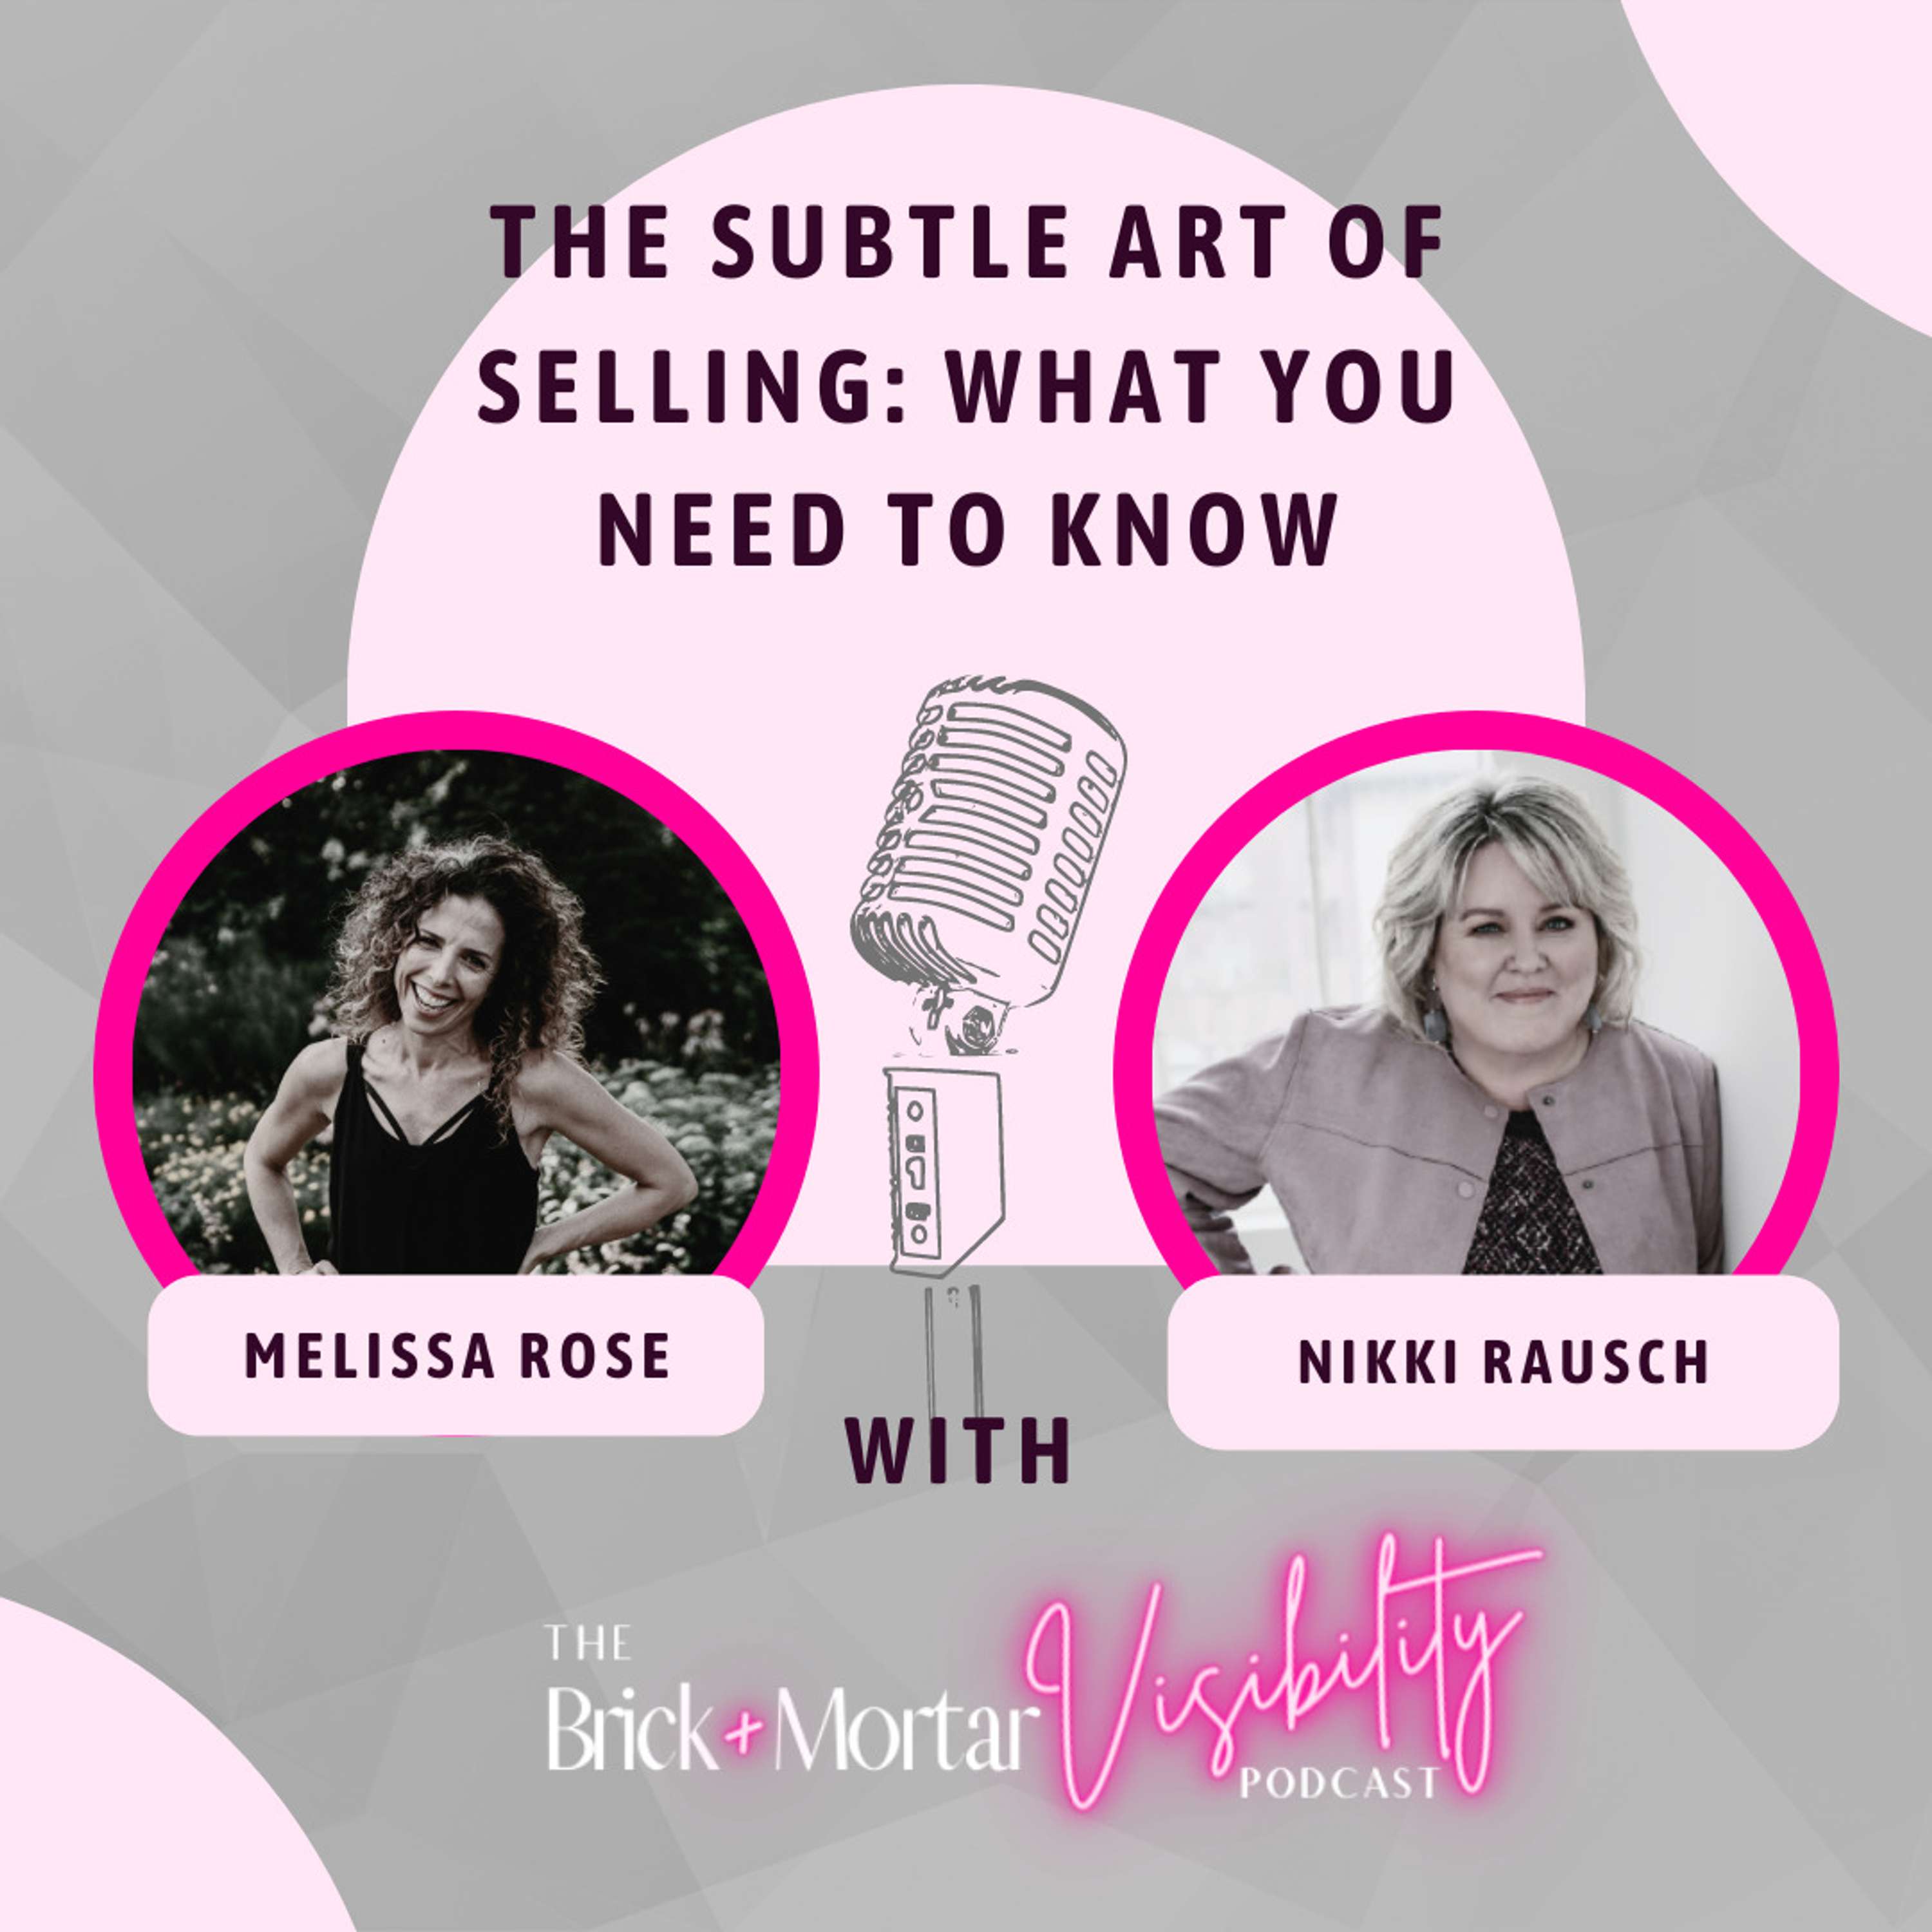 The Subtle Art of Selling: What You Need to Know with Nikki Rausch